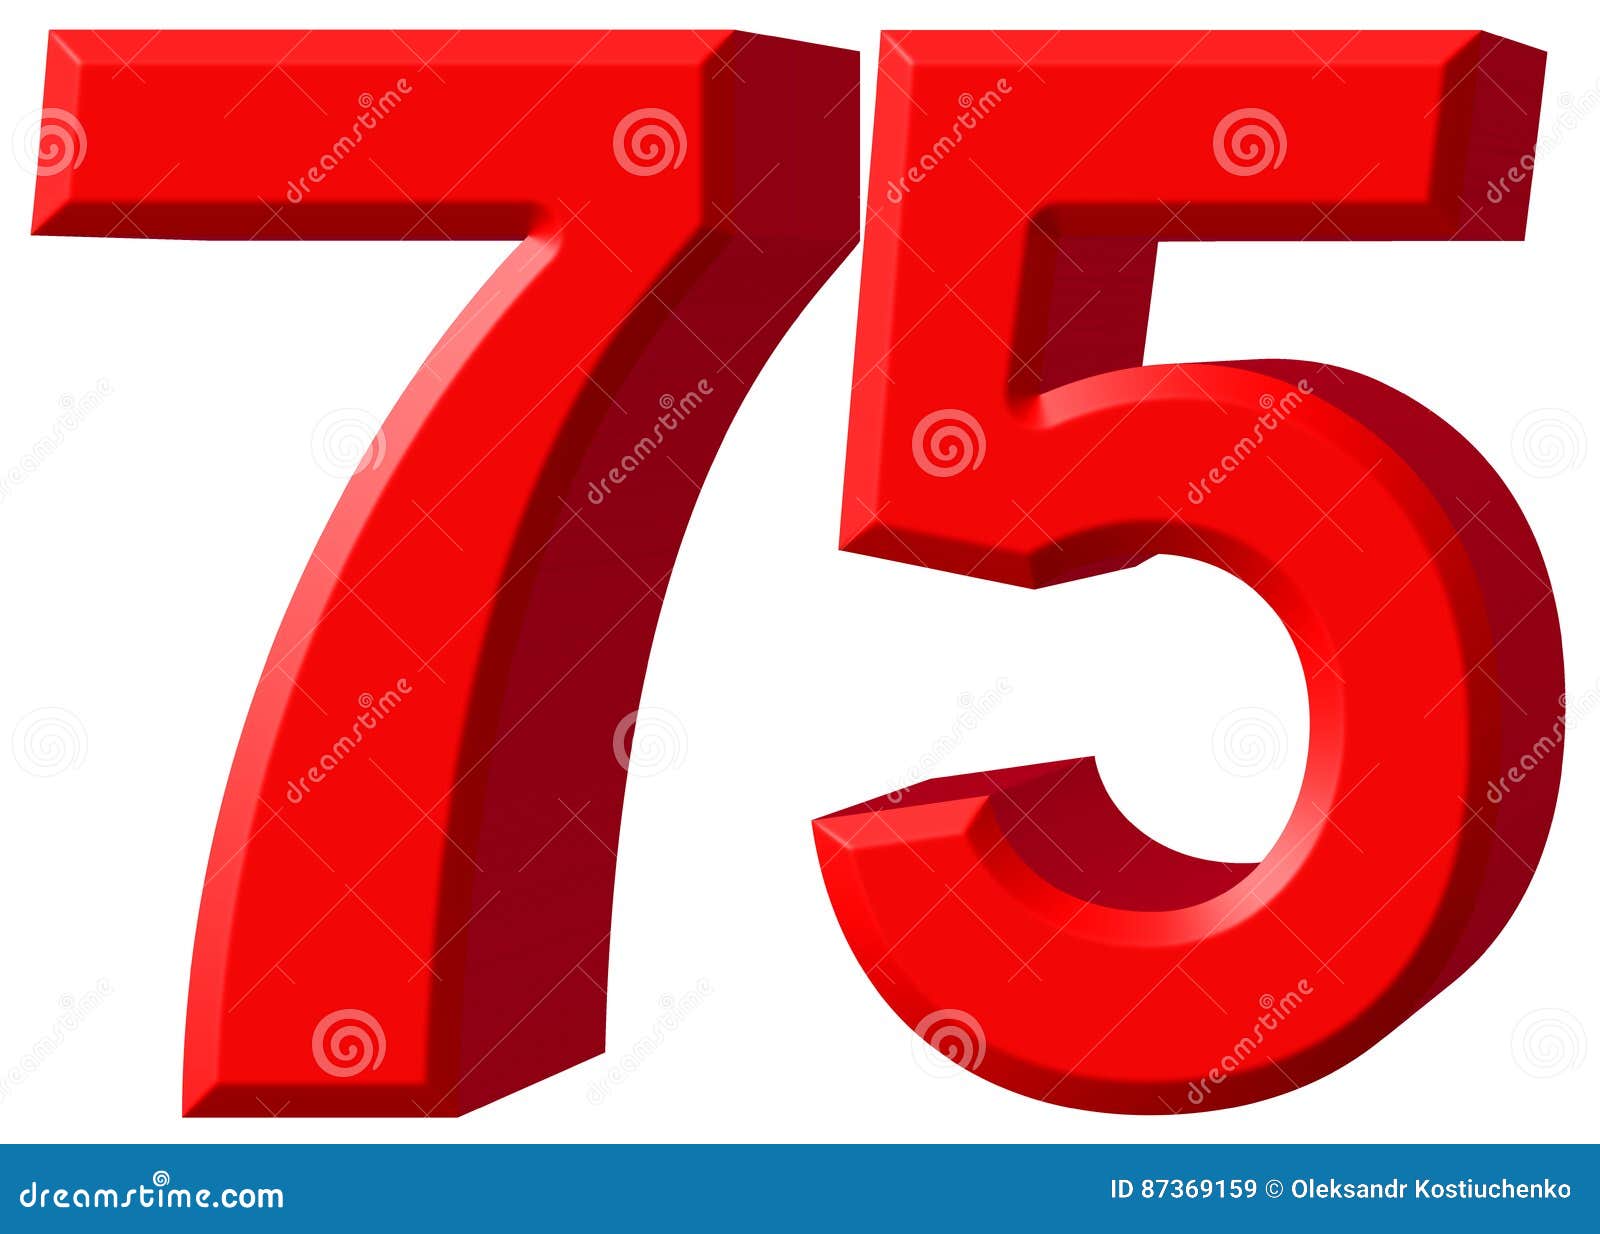 Numeral 75 Stock Illustrations – 94 Numeral 75 Stock